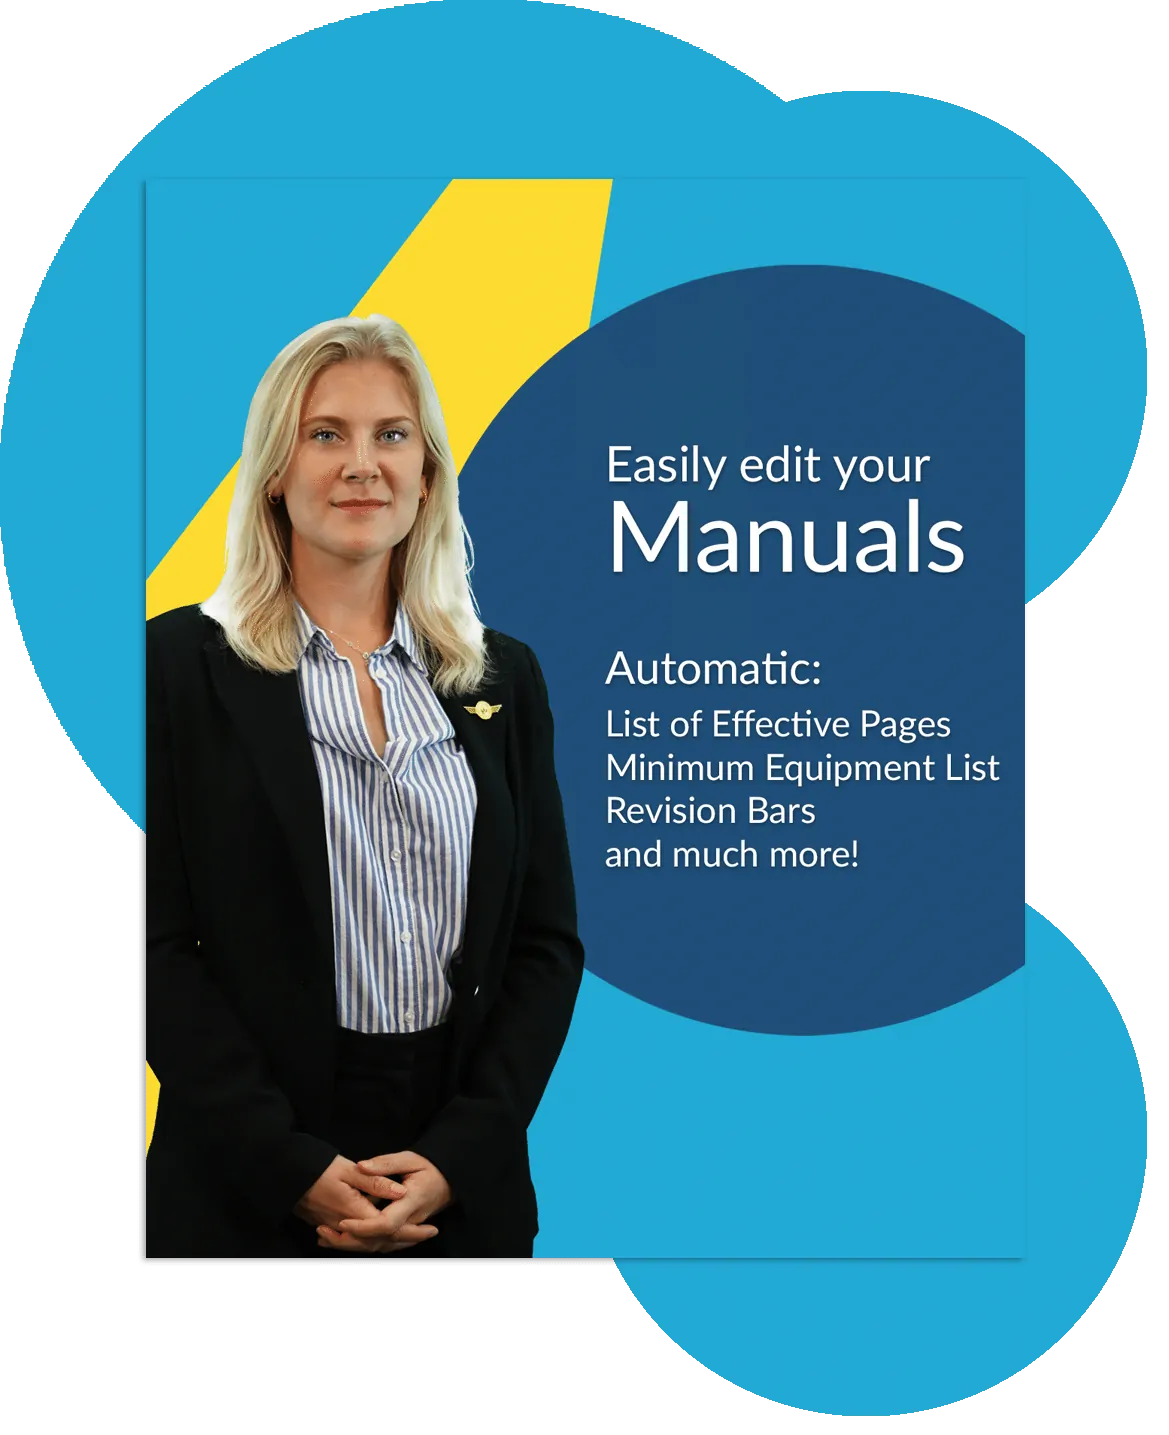 write aviation manuals with the web manuals editor. Includes automatic list of effective pages, minimum equipment list and revision bars!